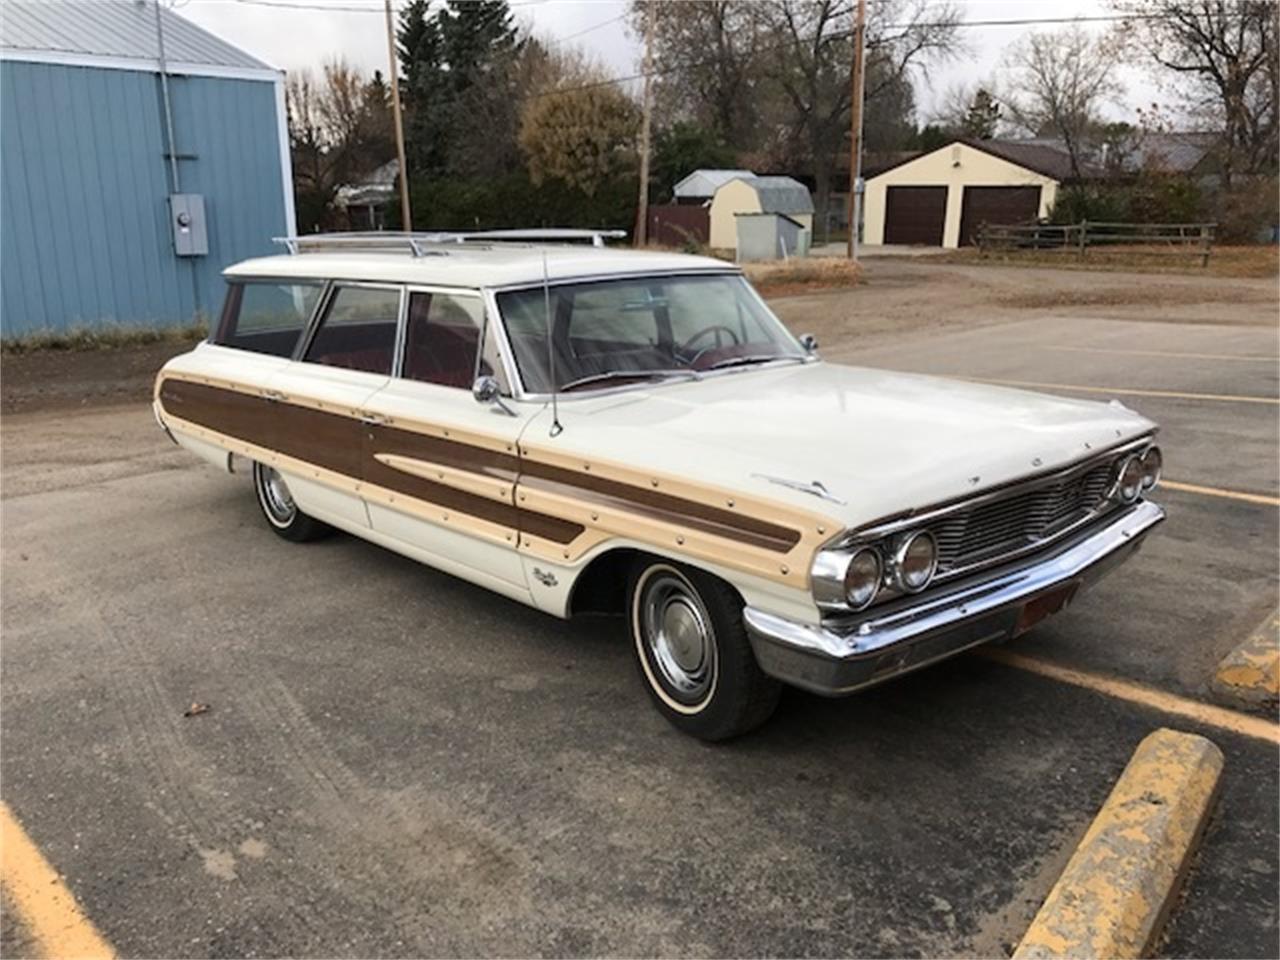 1964 ford country squire for sale classiccars com cc 1035513 1964 ford country squire for sale